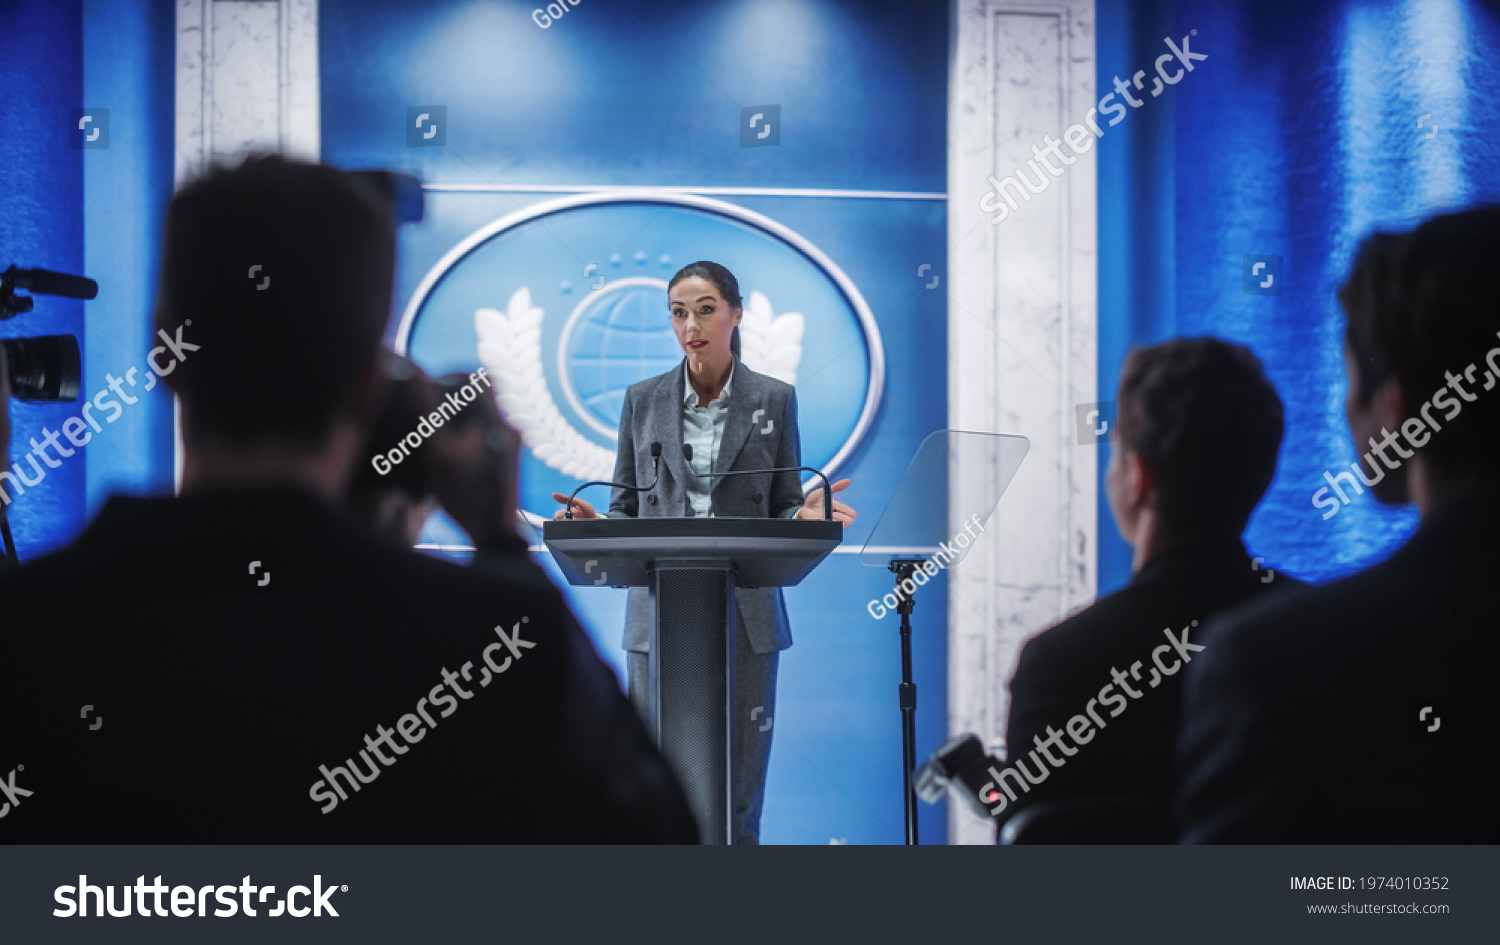 Organization Female Representative Speaking at a Press Conference in Government Building. Press Office Representative Delivering a Speech at a Summit. Minister Speaking to a Congress Hearing. #1974010352